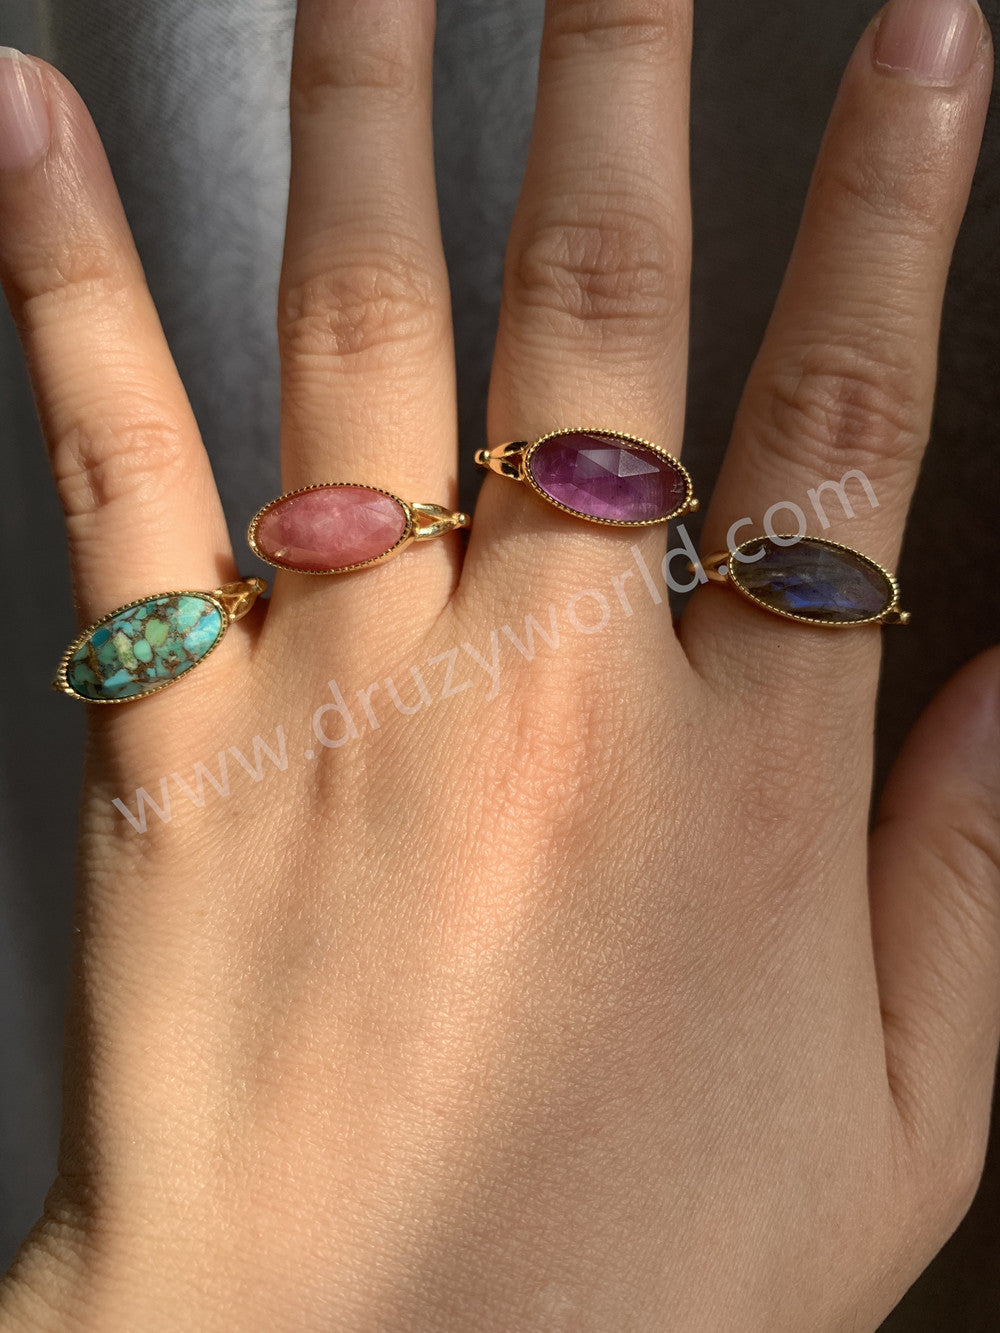 Gold Plated Oval Birthstone Gemstone Faceted Ring, Healing Boho Crystal Jewlery ZG0509